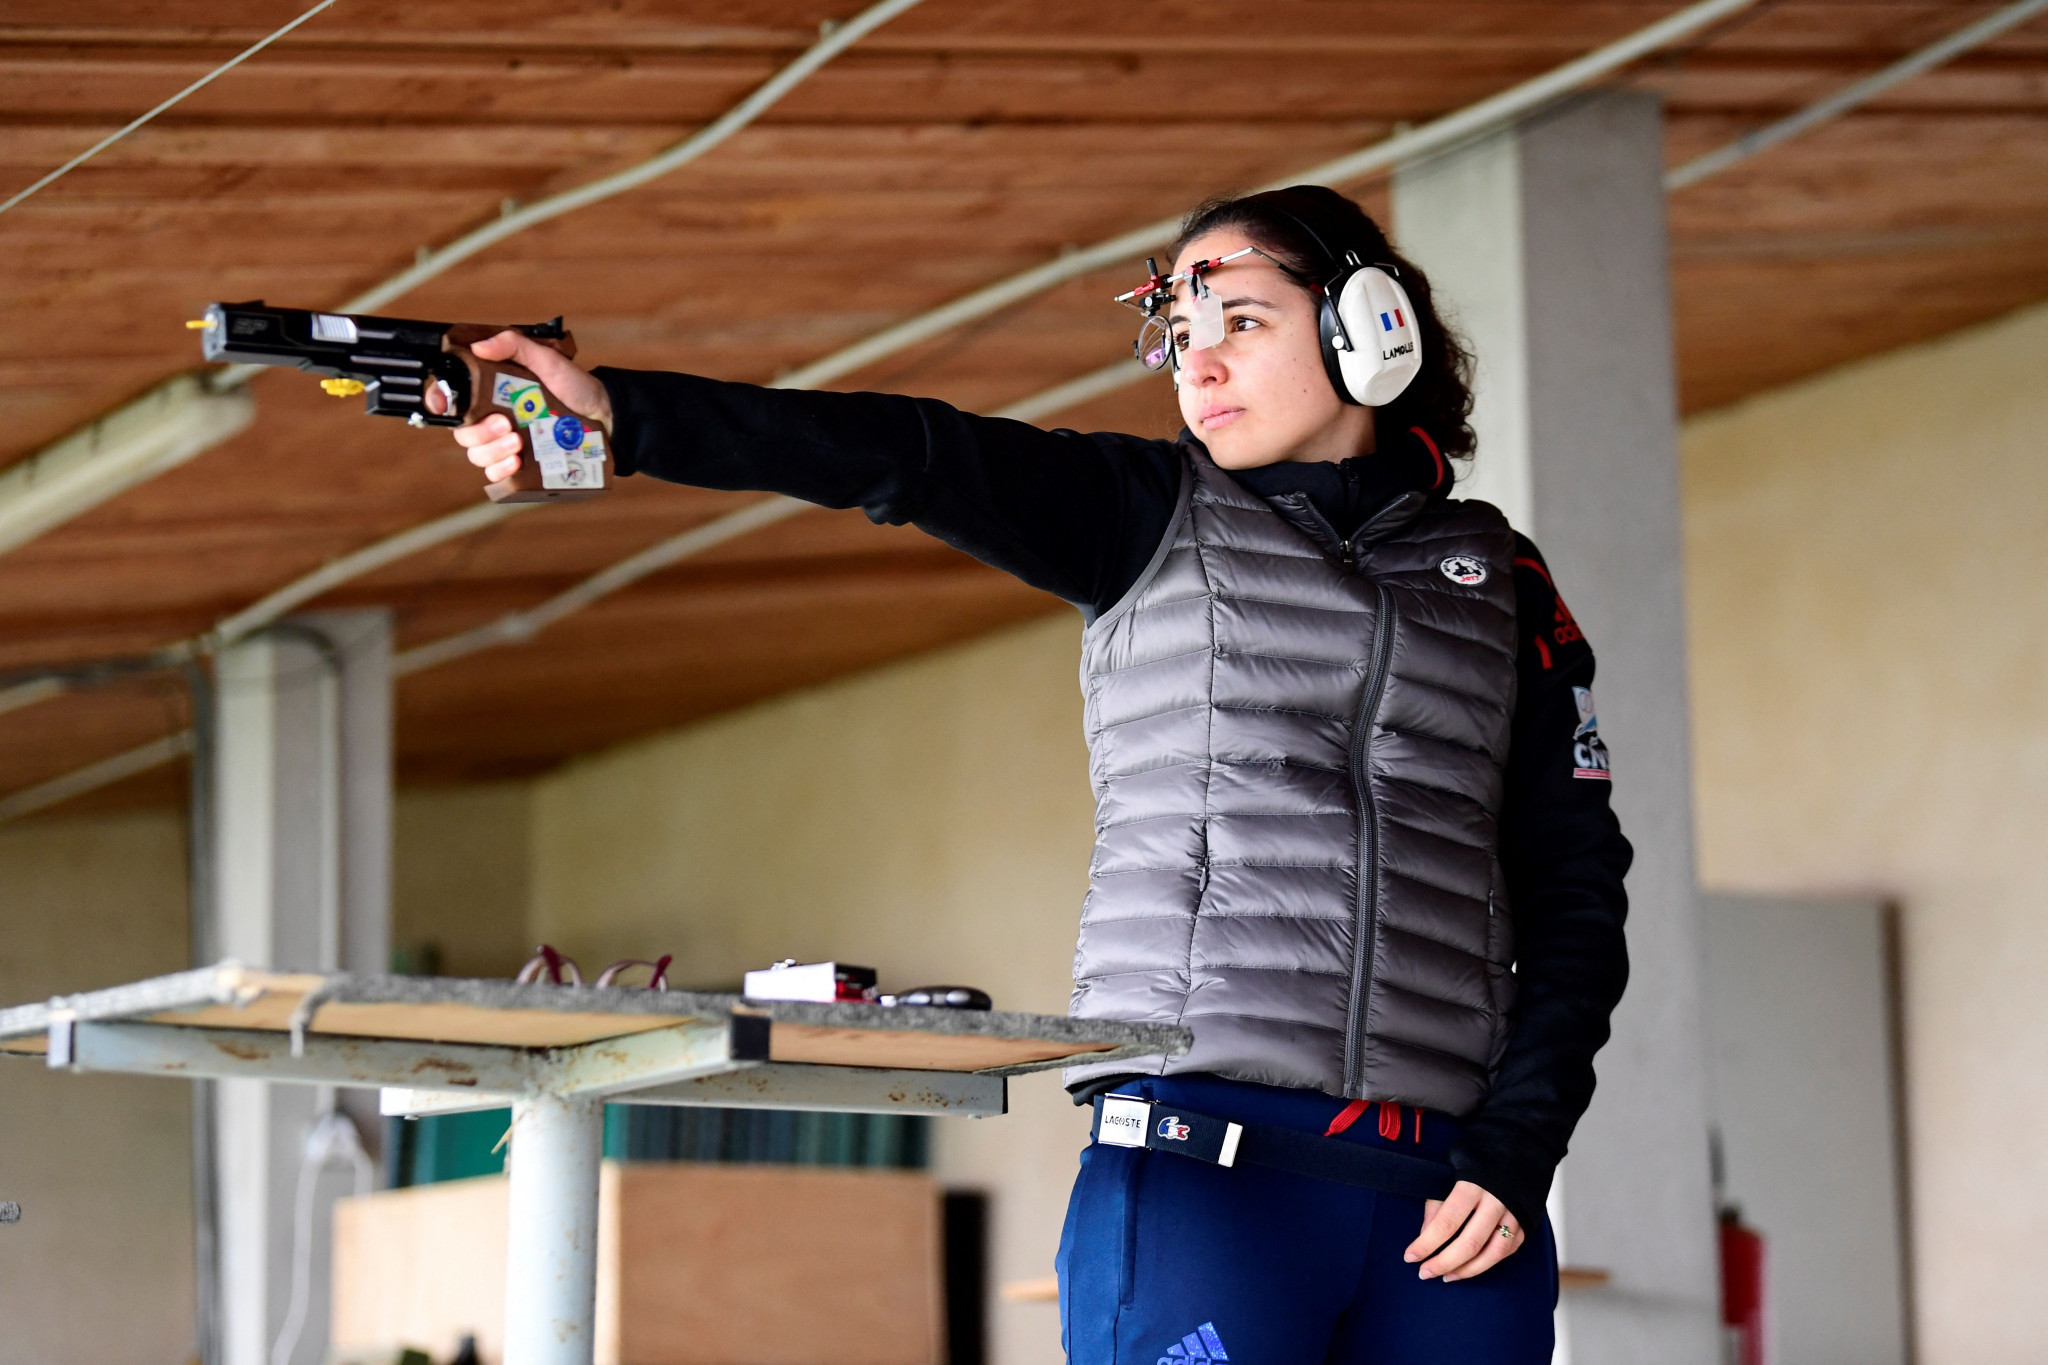 Shooters from Slovakia and France top podium at ISSF World Cup in Cairo